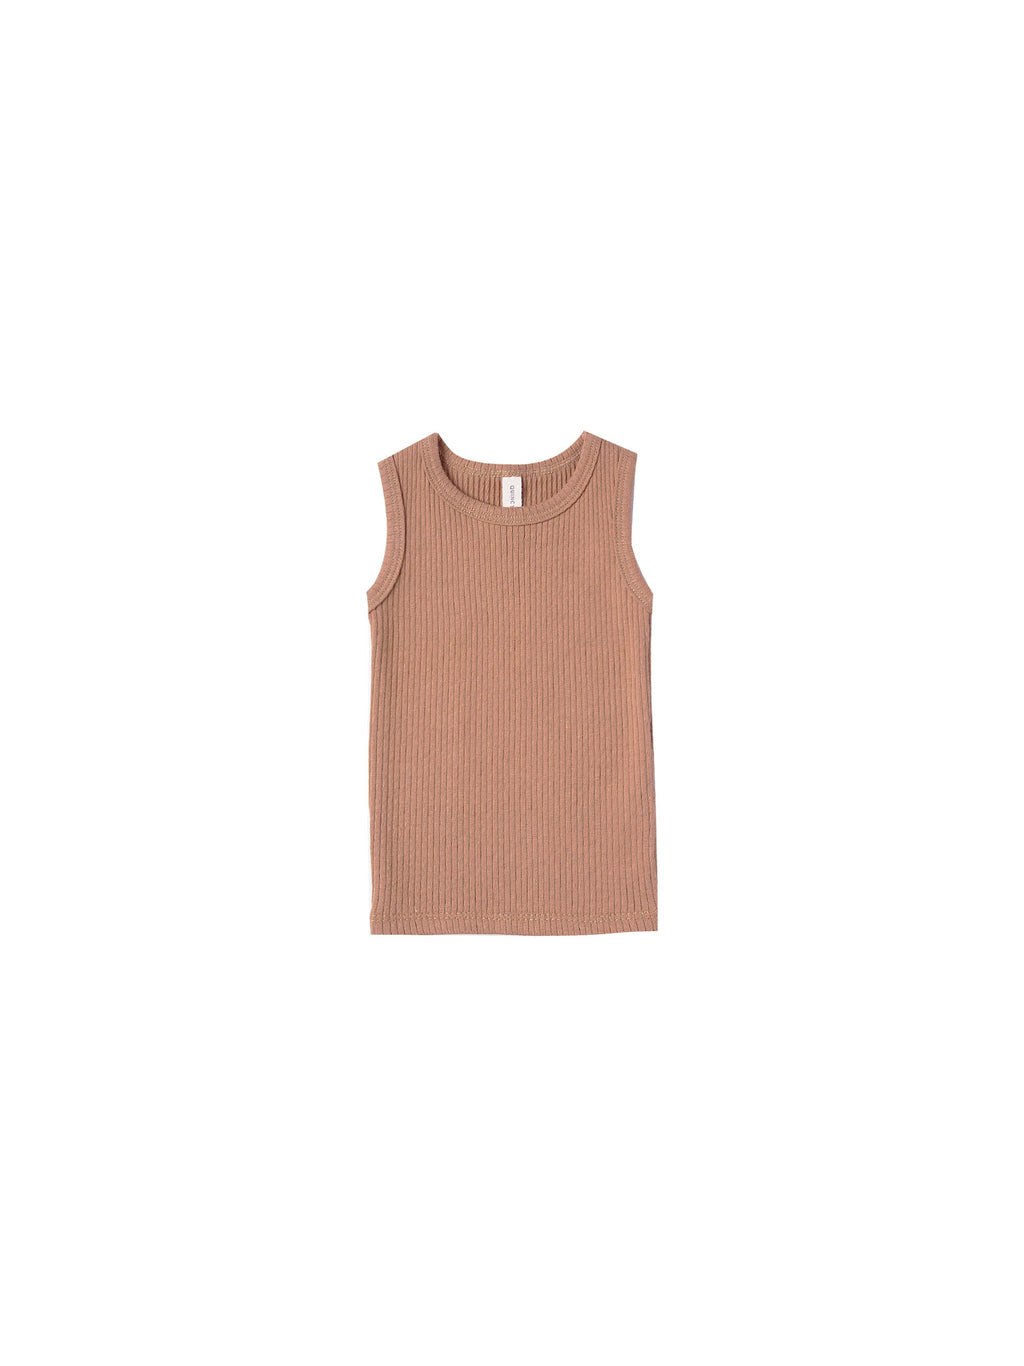 Quincy Mae Ribbed Tank - Terracotta